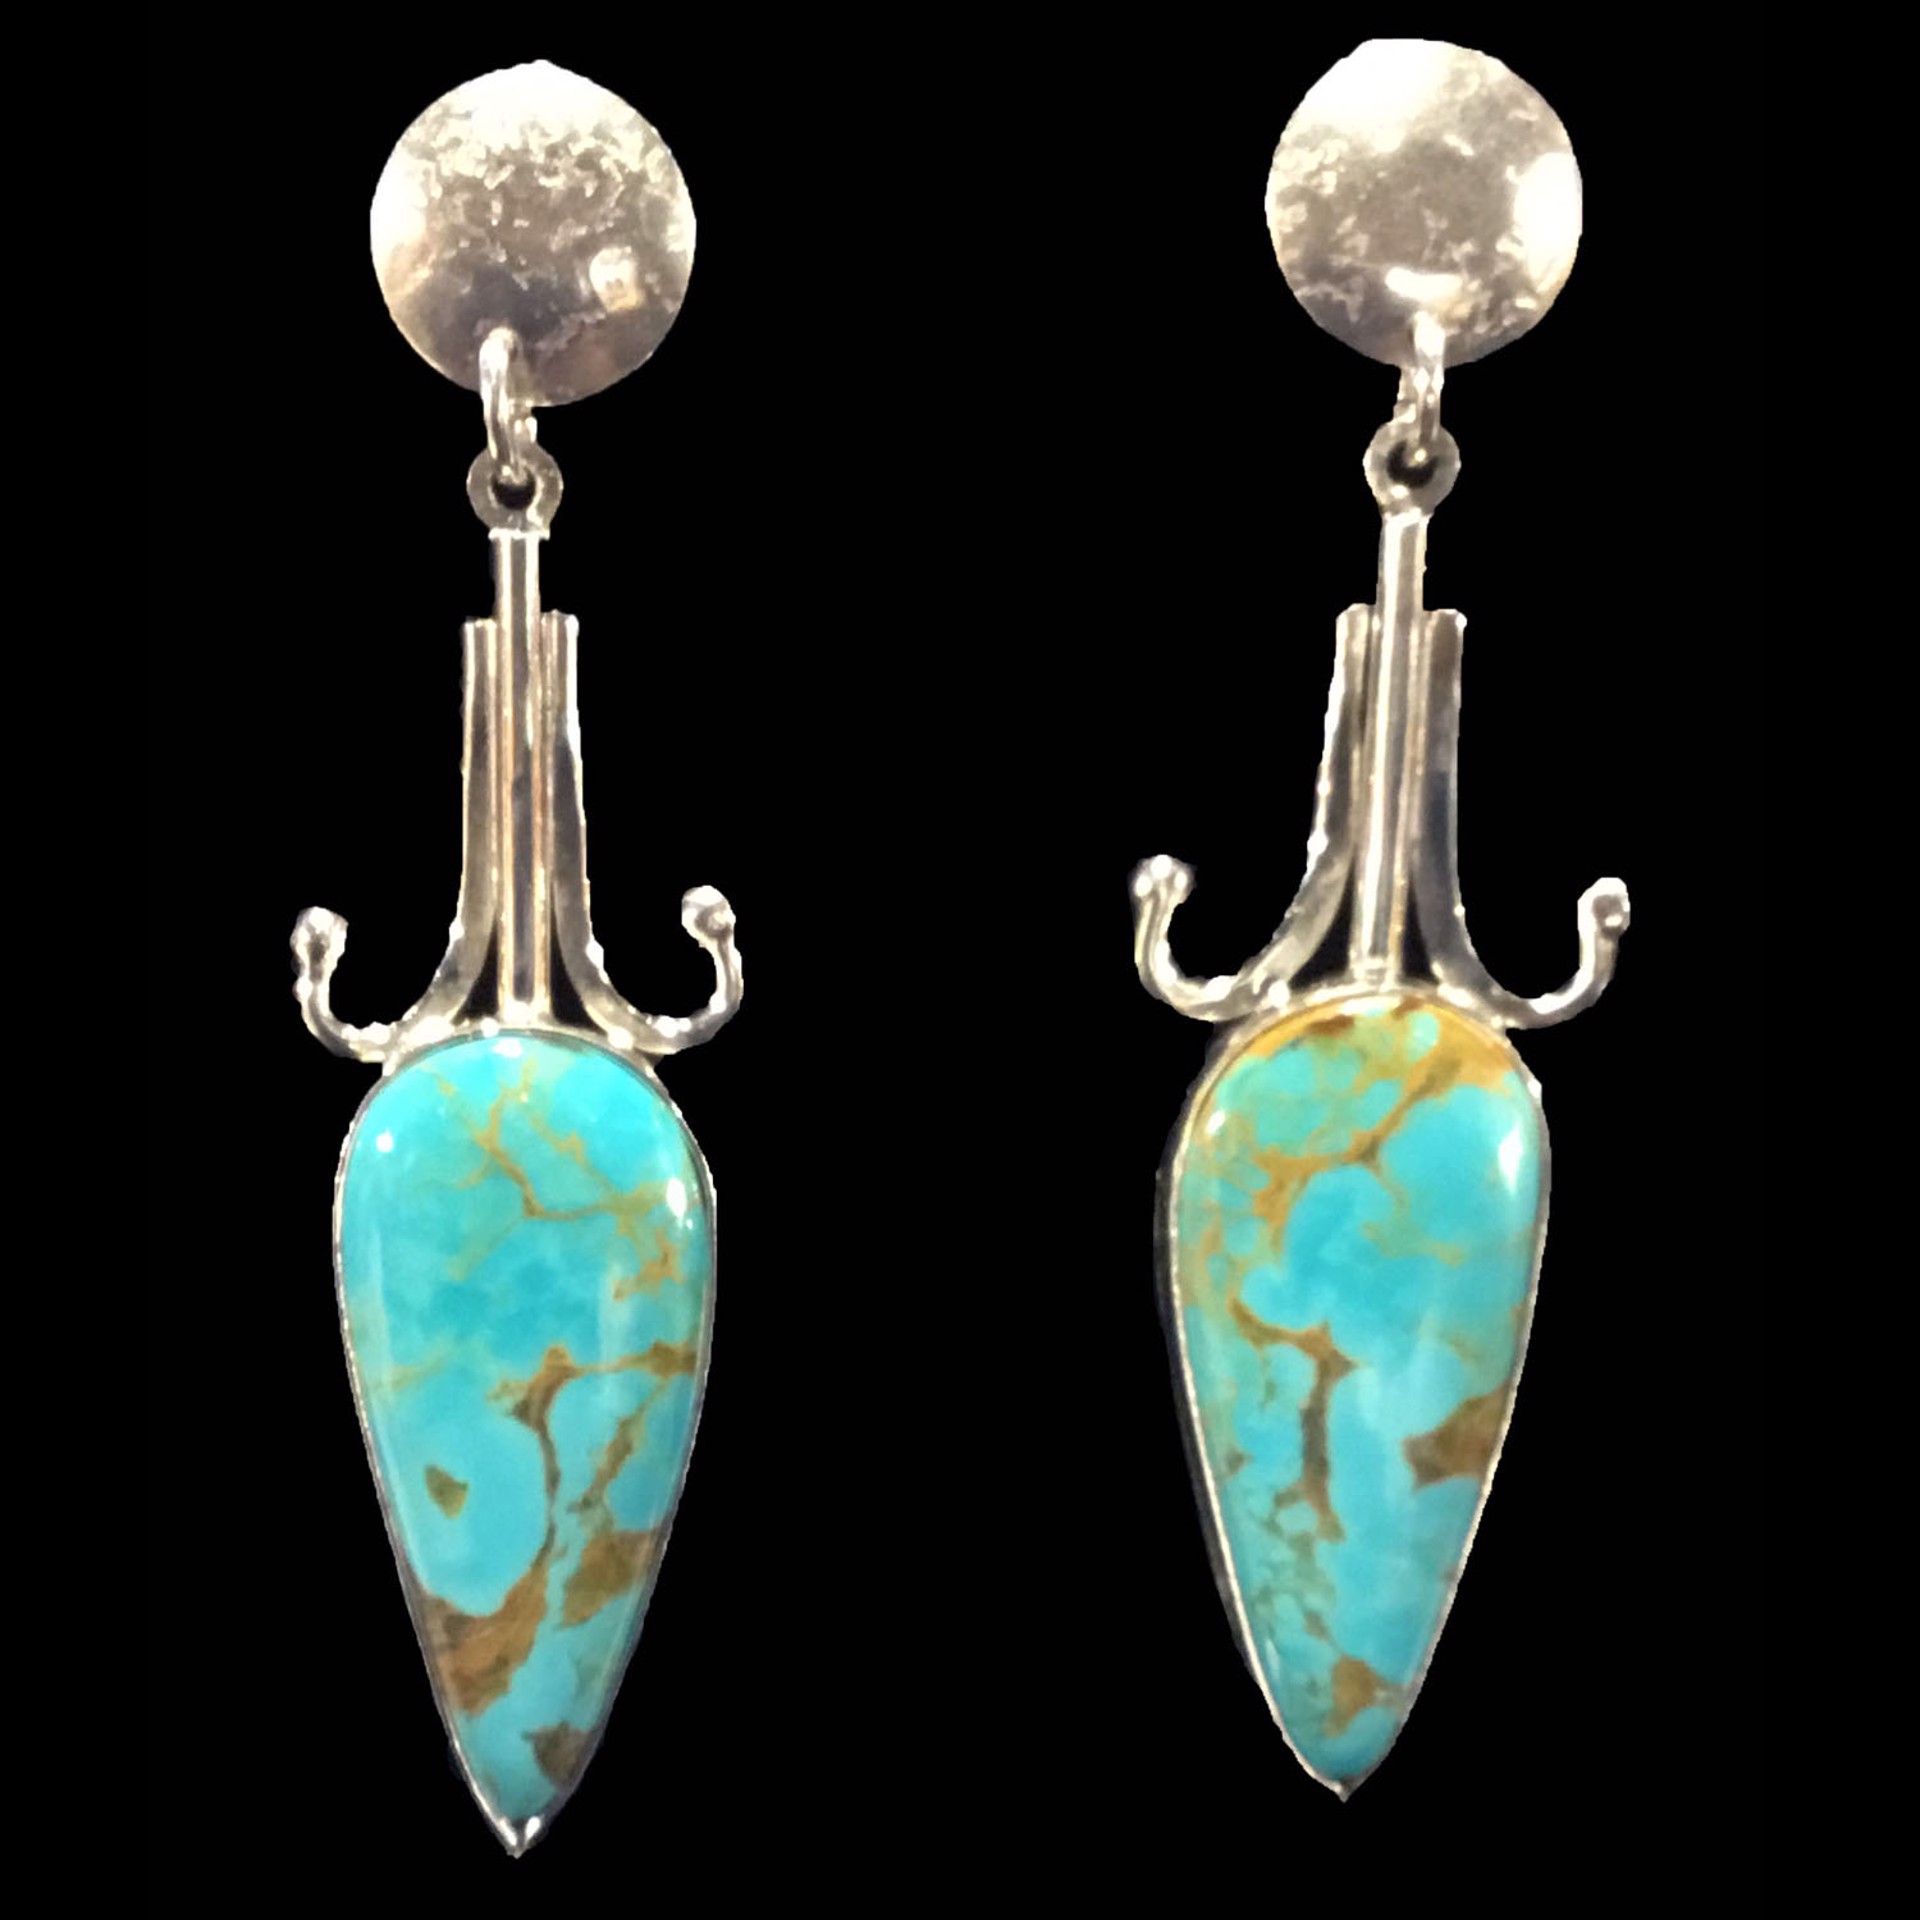 Turquoise Inverted Tears Earrings by Michael Redhawk